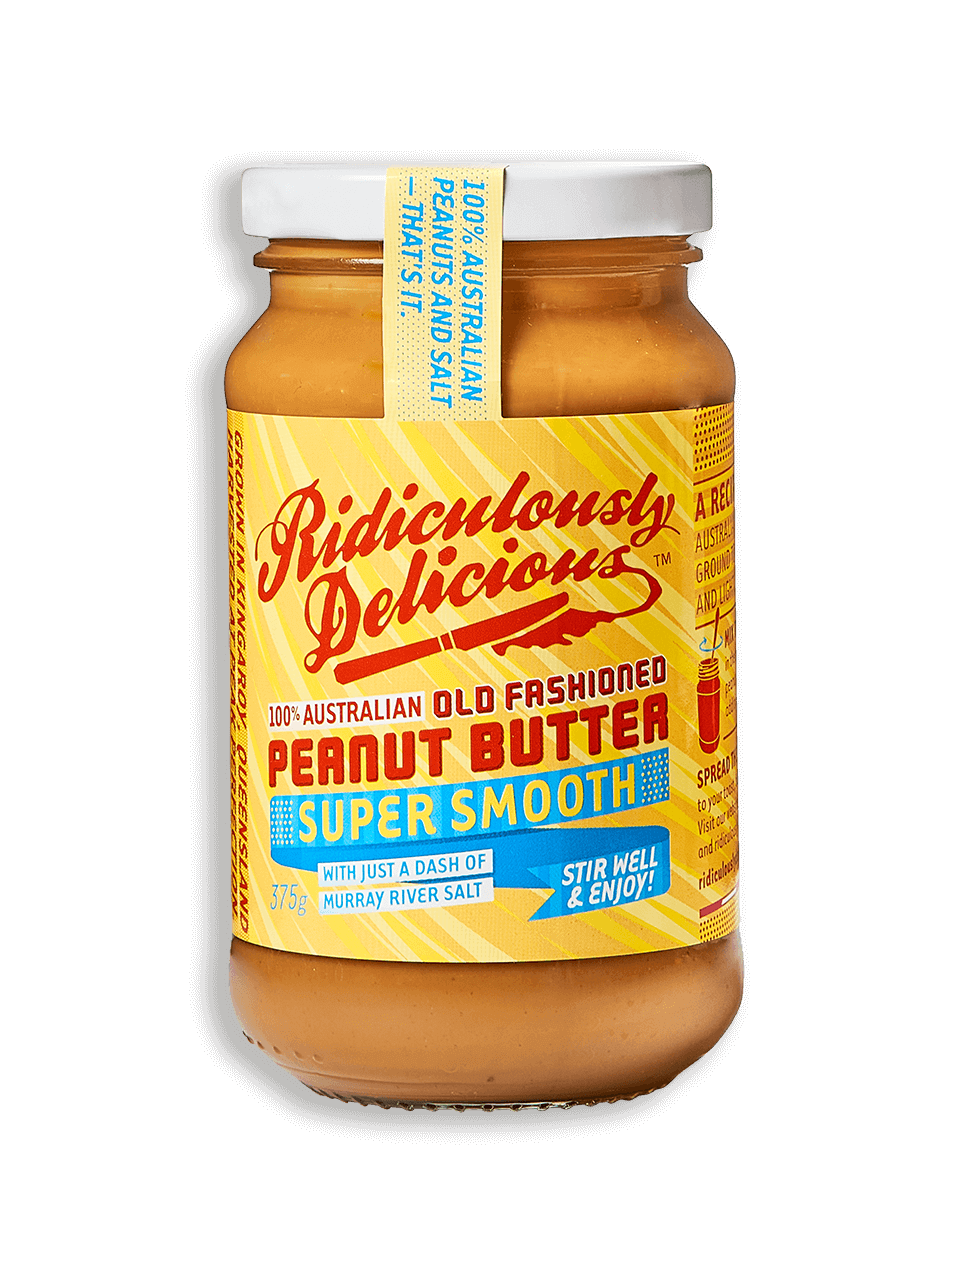 Ridiculously Delicious Peanut Butter - Super Smooth